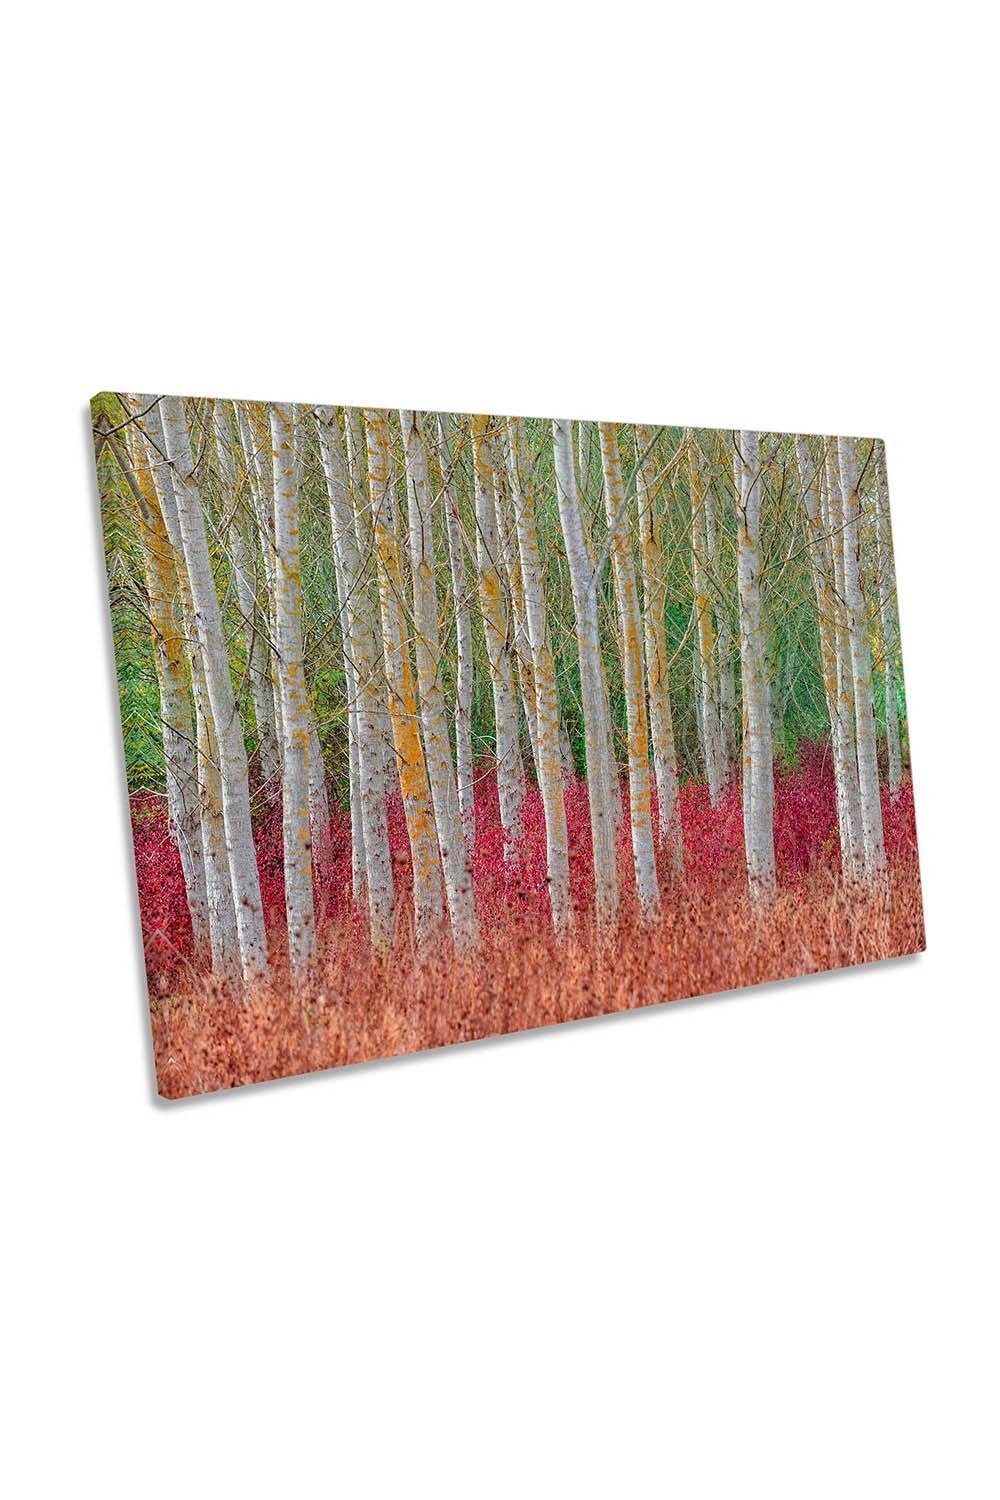 Birch Rainbow Forest Floral Canvas Wall Art Picture Print